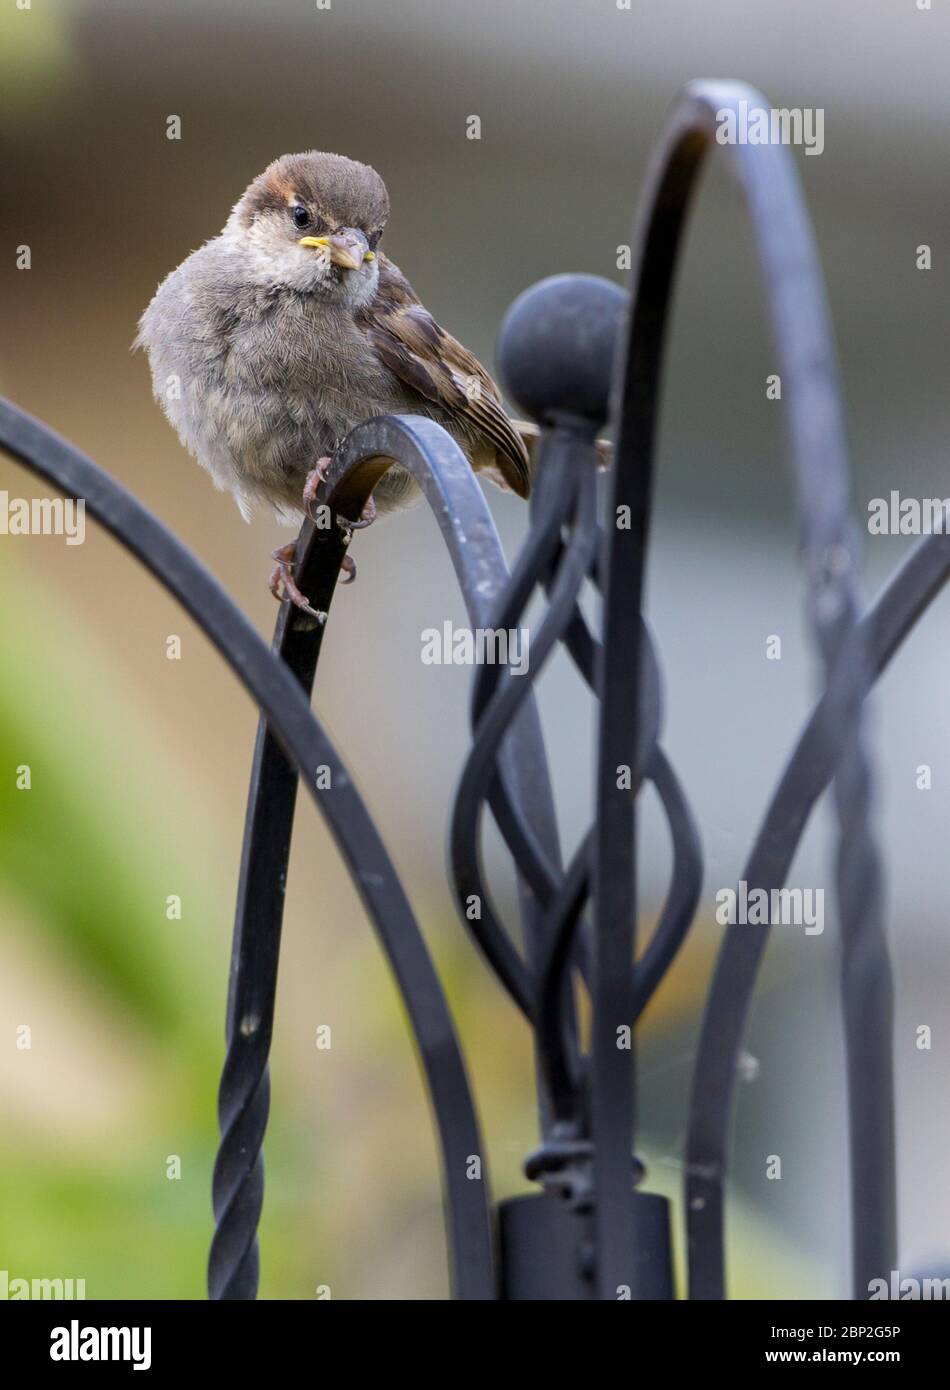 House sparrow Passer domesticus fledgling on feeder. Adult plumage grey crown cheeks and rump brown nape back and wings pale underside black throat. Stock Photo